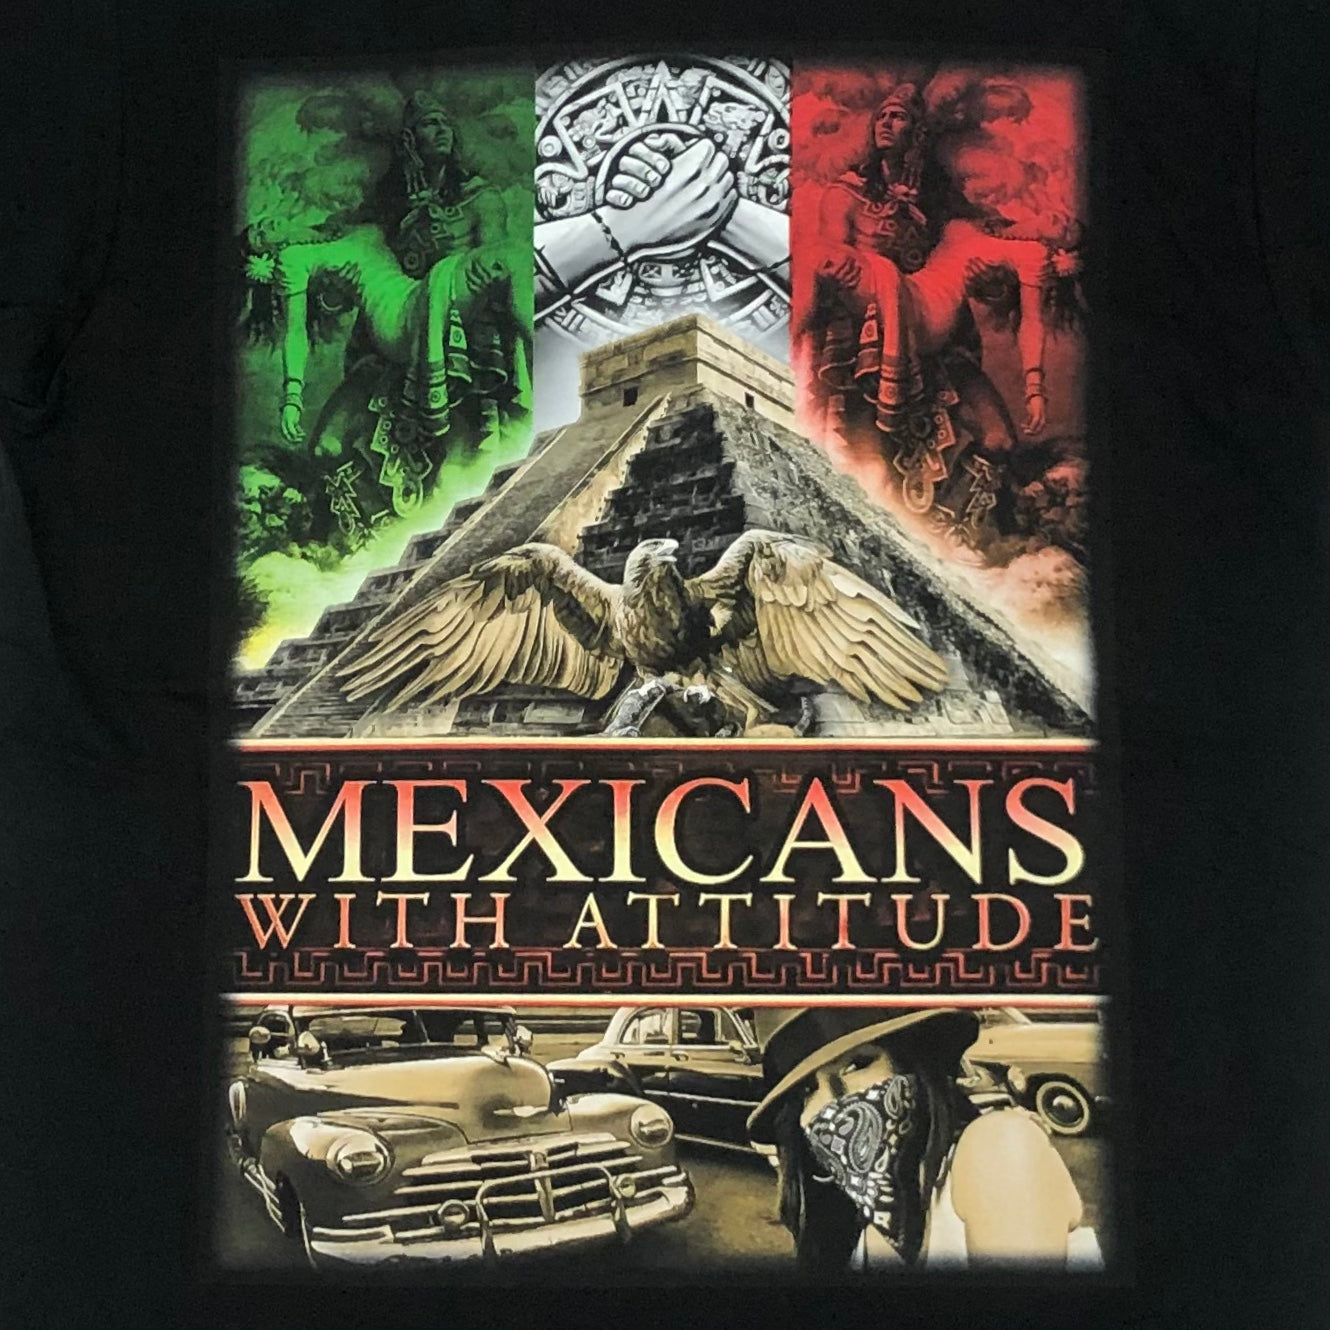 BILLIONAIRE Mexicans With Attitude Graphic T-Shirt